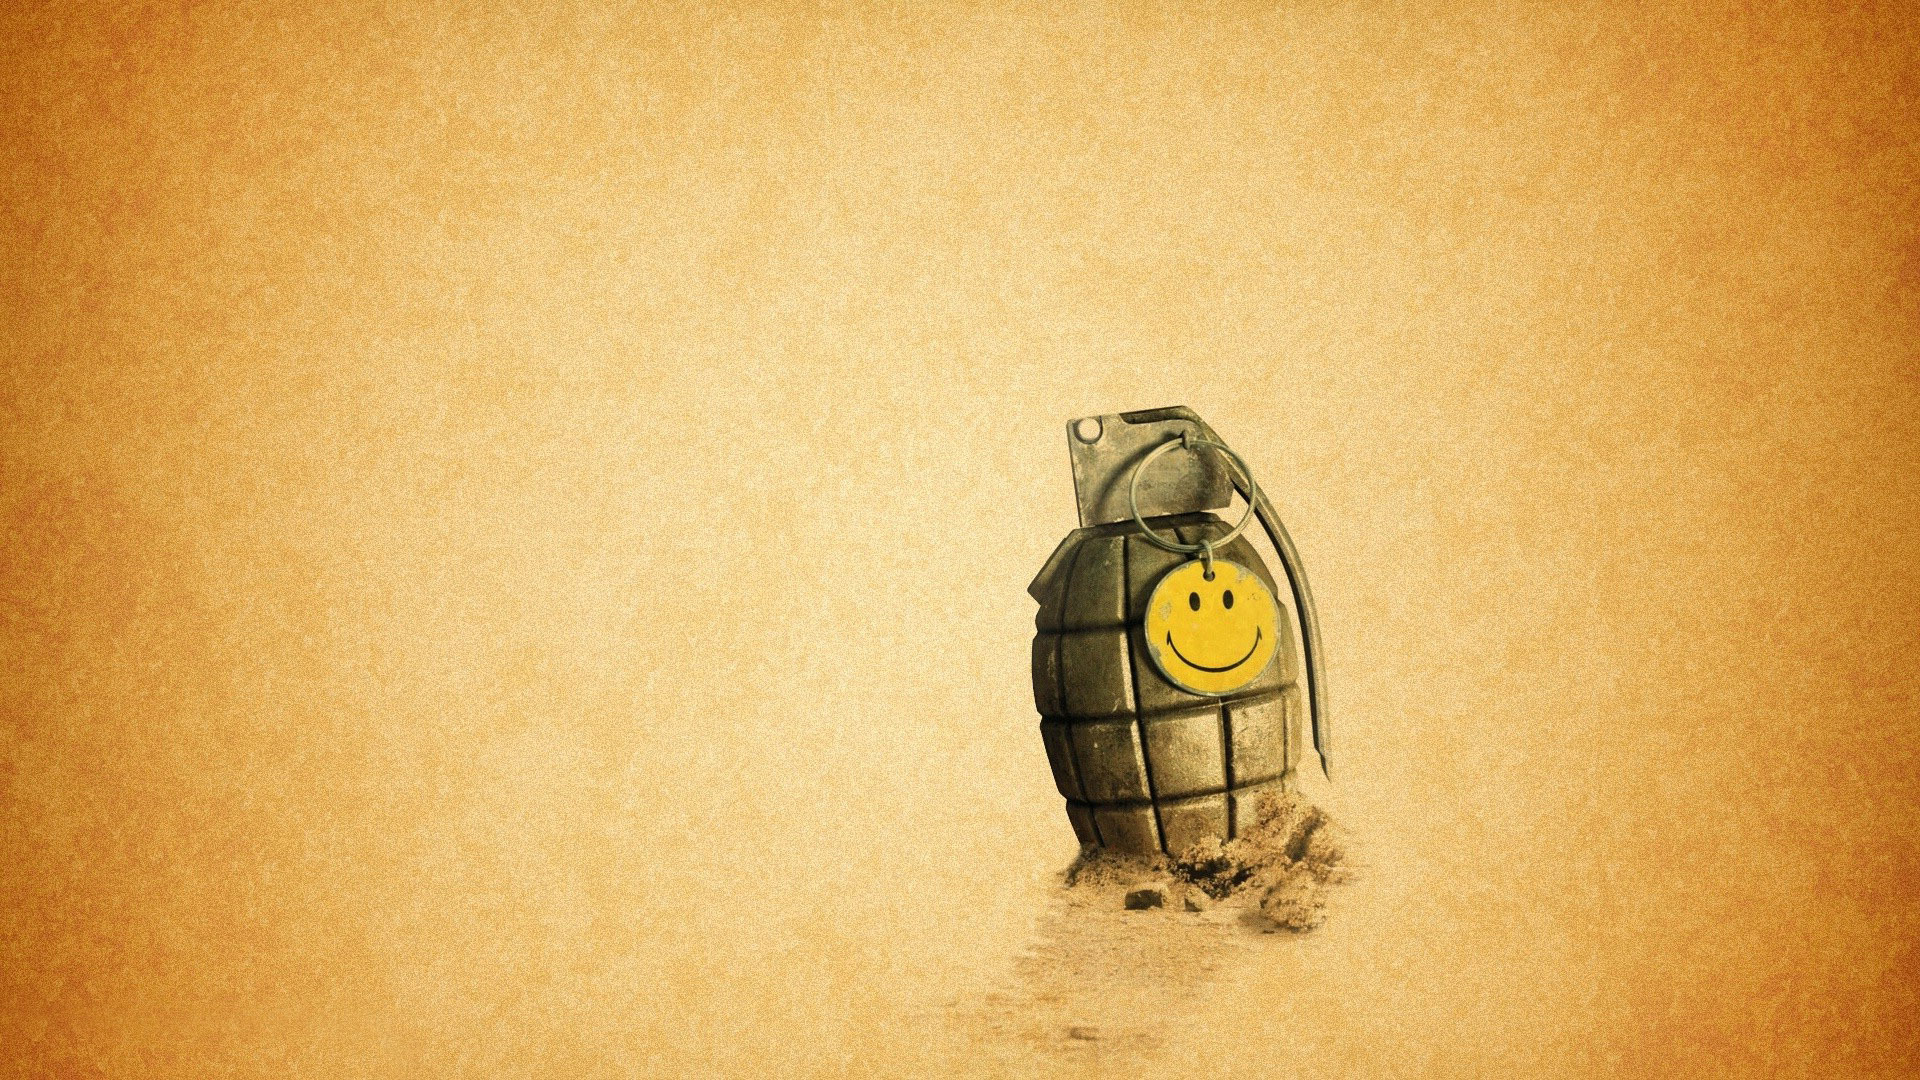 Grenade With A Smiley Pin HD Wallpaper